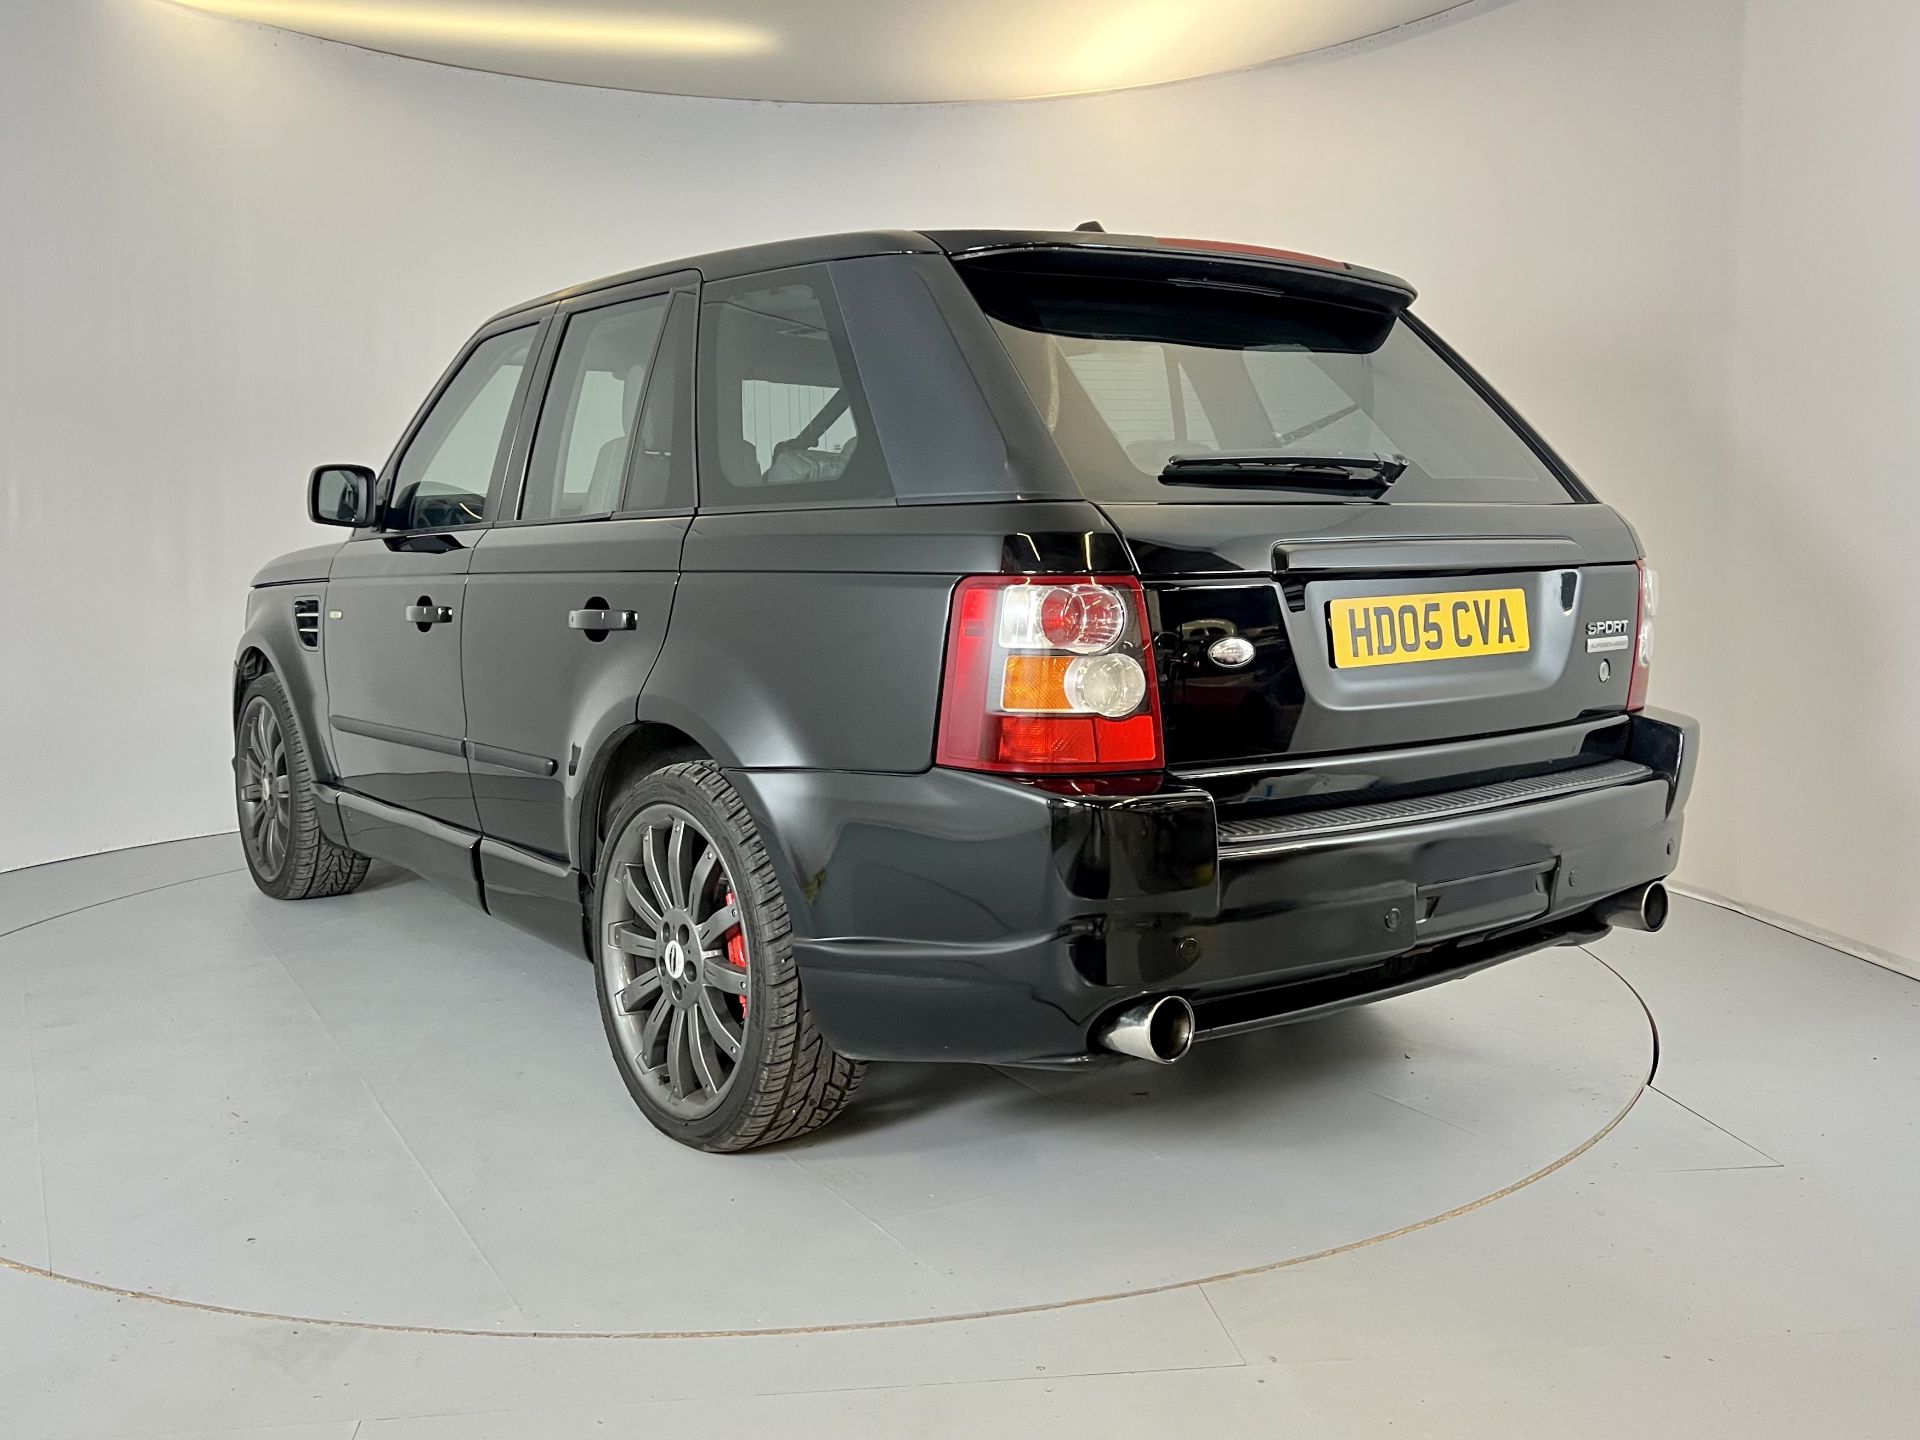 Range Rover Sport 1st Edition 4.2 Supercharged OverFinch - Image 7 of 33